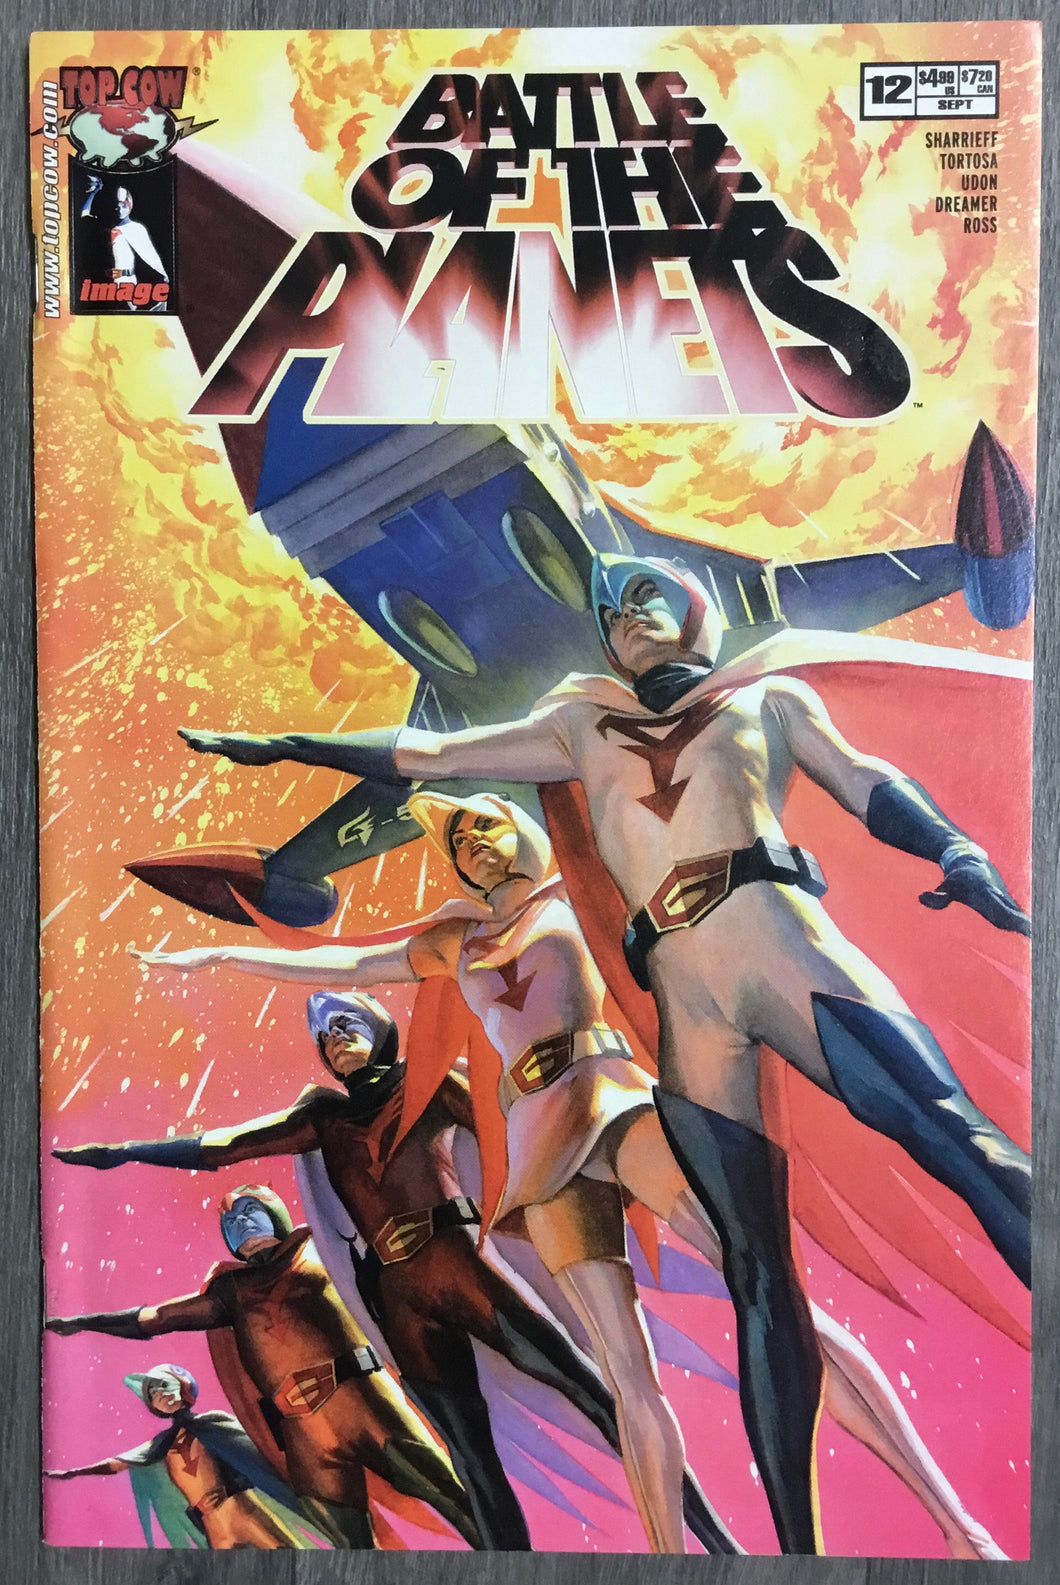 Battle of the Planets No. #12 2003 Top Cow/Image Comics